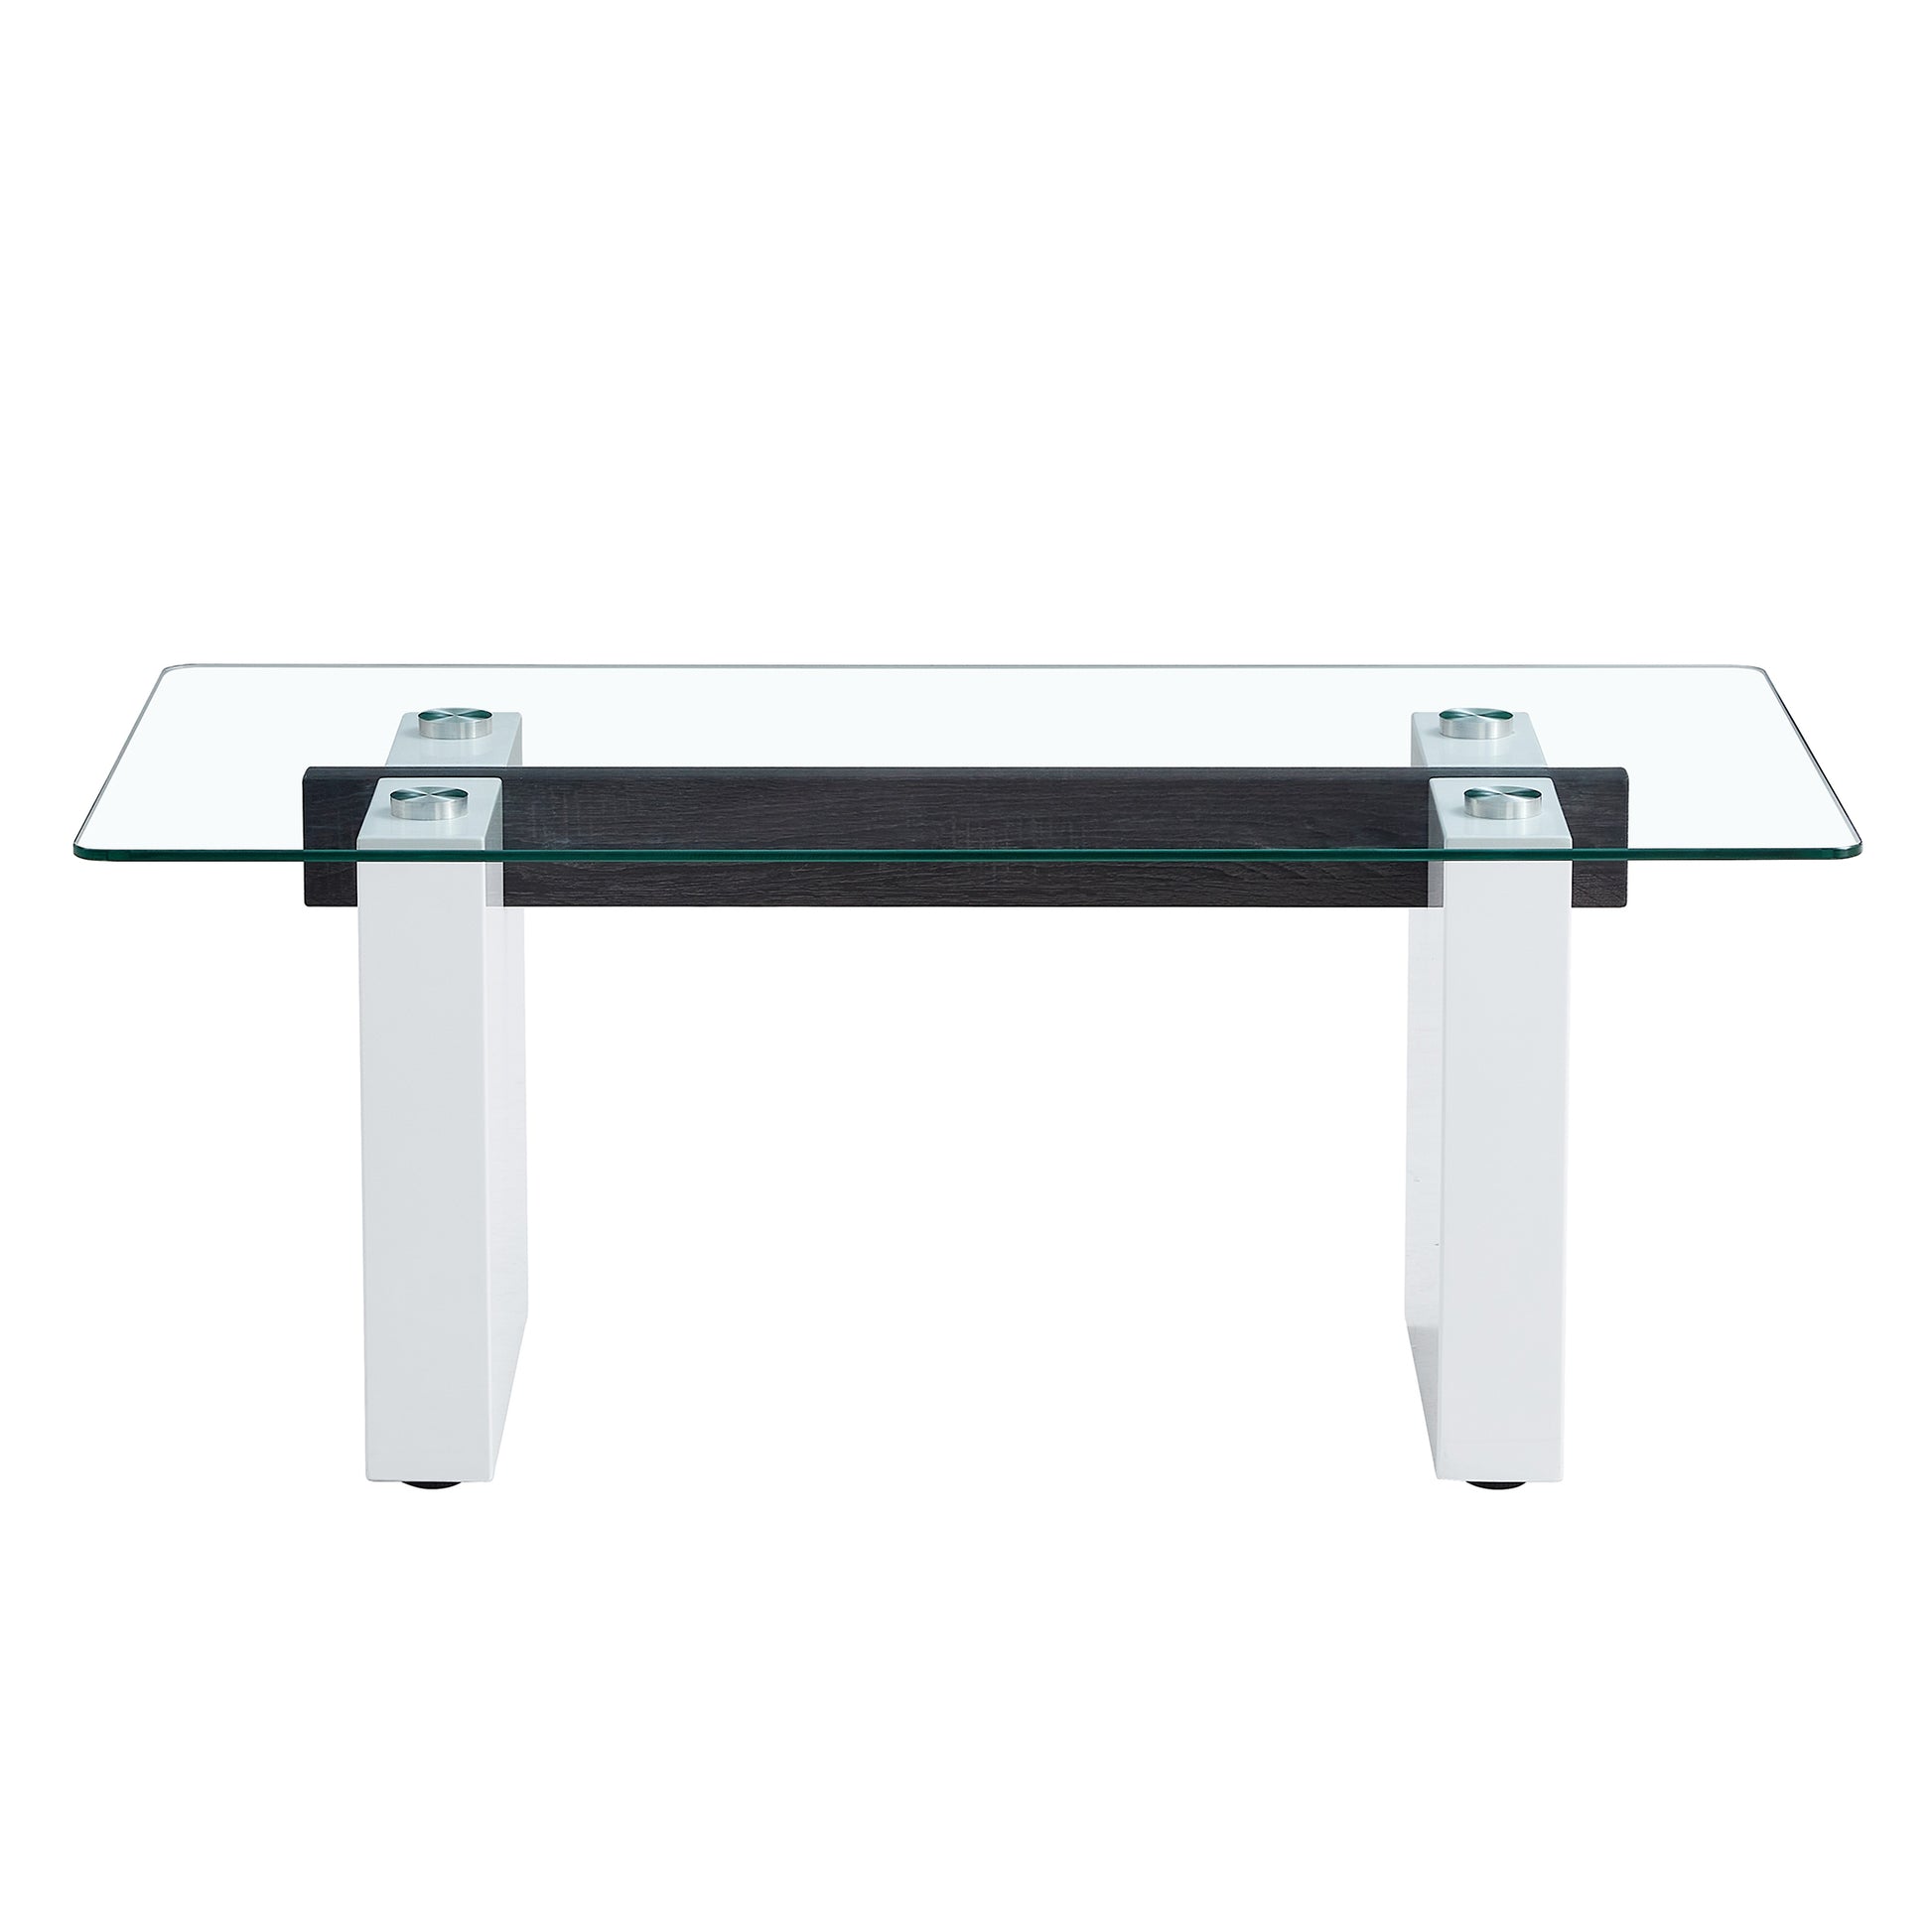 Modern minimalist transparent tempered glass coffee table and coffee table, paired with white MDF decorative columns. Computer desk. MLNshops